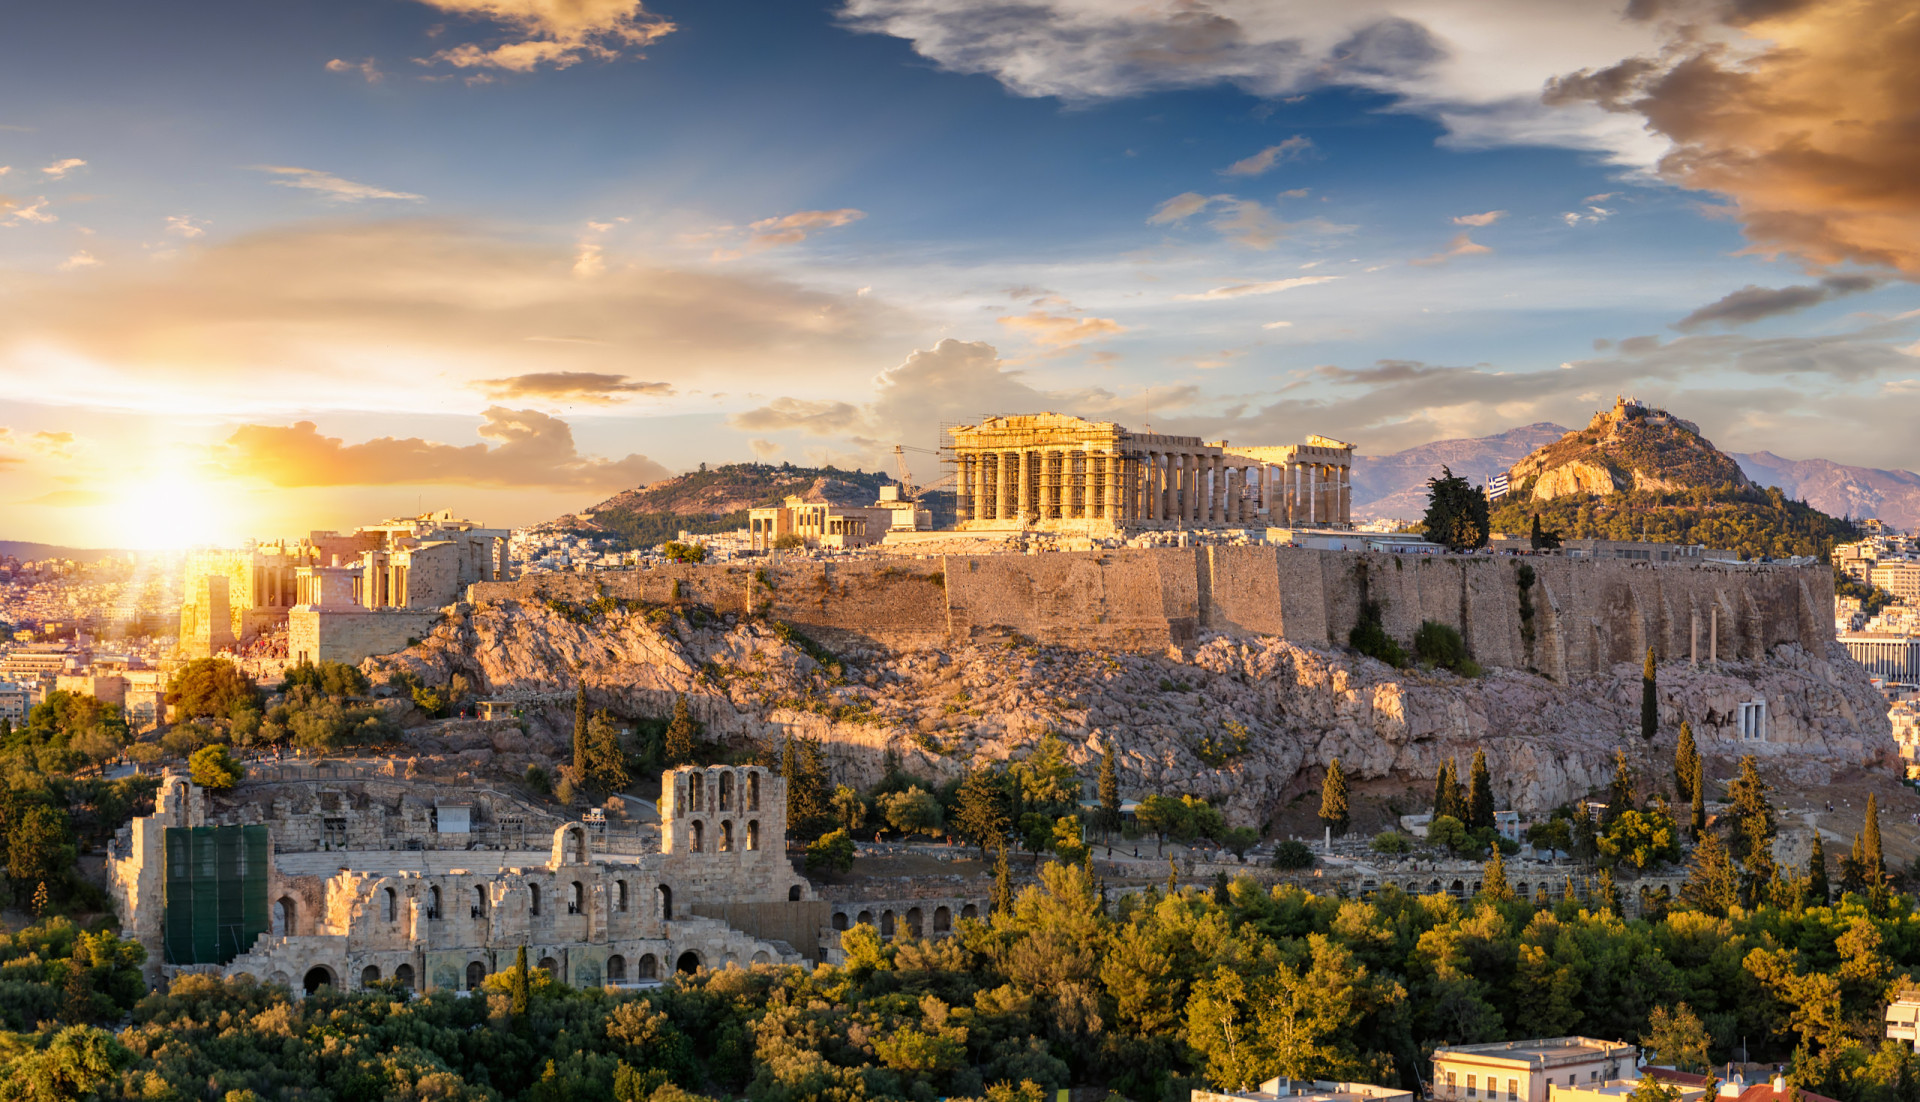 <p>The Greek city of Athens is a must-see on any tourist’s list. After all, it is one of the <a href="https://www.starsinsider.com/travel/520238/the-oldest-continuously-inhabited-cities-in-the-world" rel="noopener">world's oldest cities</a>, dating back to the 11th century BCE. It is named after the Greek goddess Athena and is most renowned for the ruins of the Acropolis, pictured here.</p><p>You may also like:<a href="https://www.starsinsider.com/n/386005?utm_source=msn.com&utm_medium=display&utm_campaign=referral_description&utm_content=700885en-us"> Celebrities who've battled addiction</a></p>